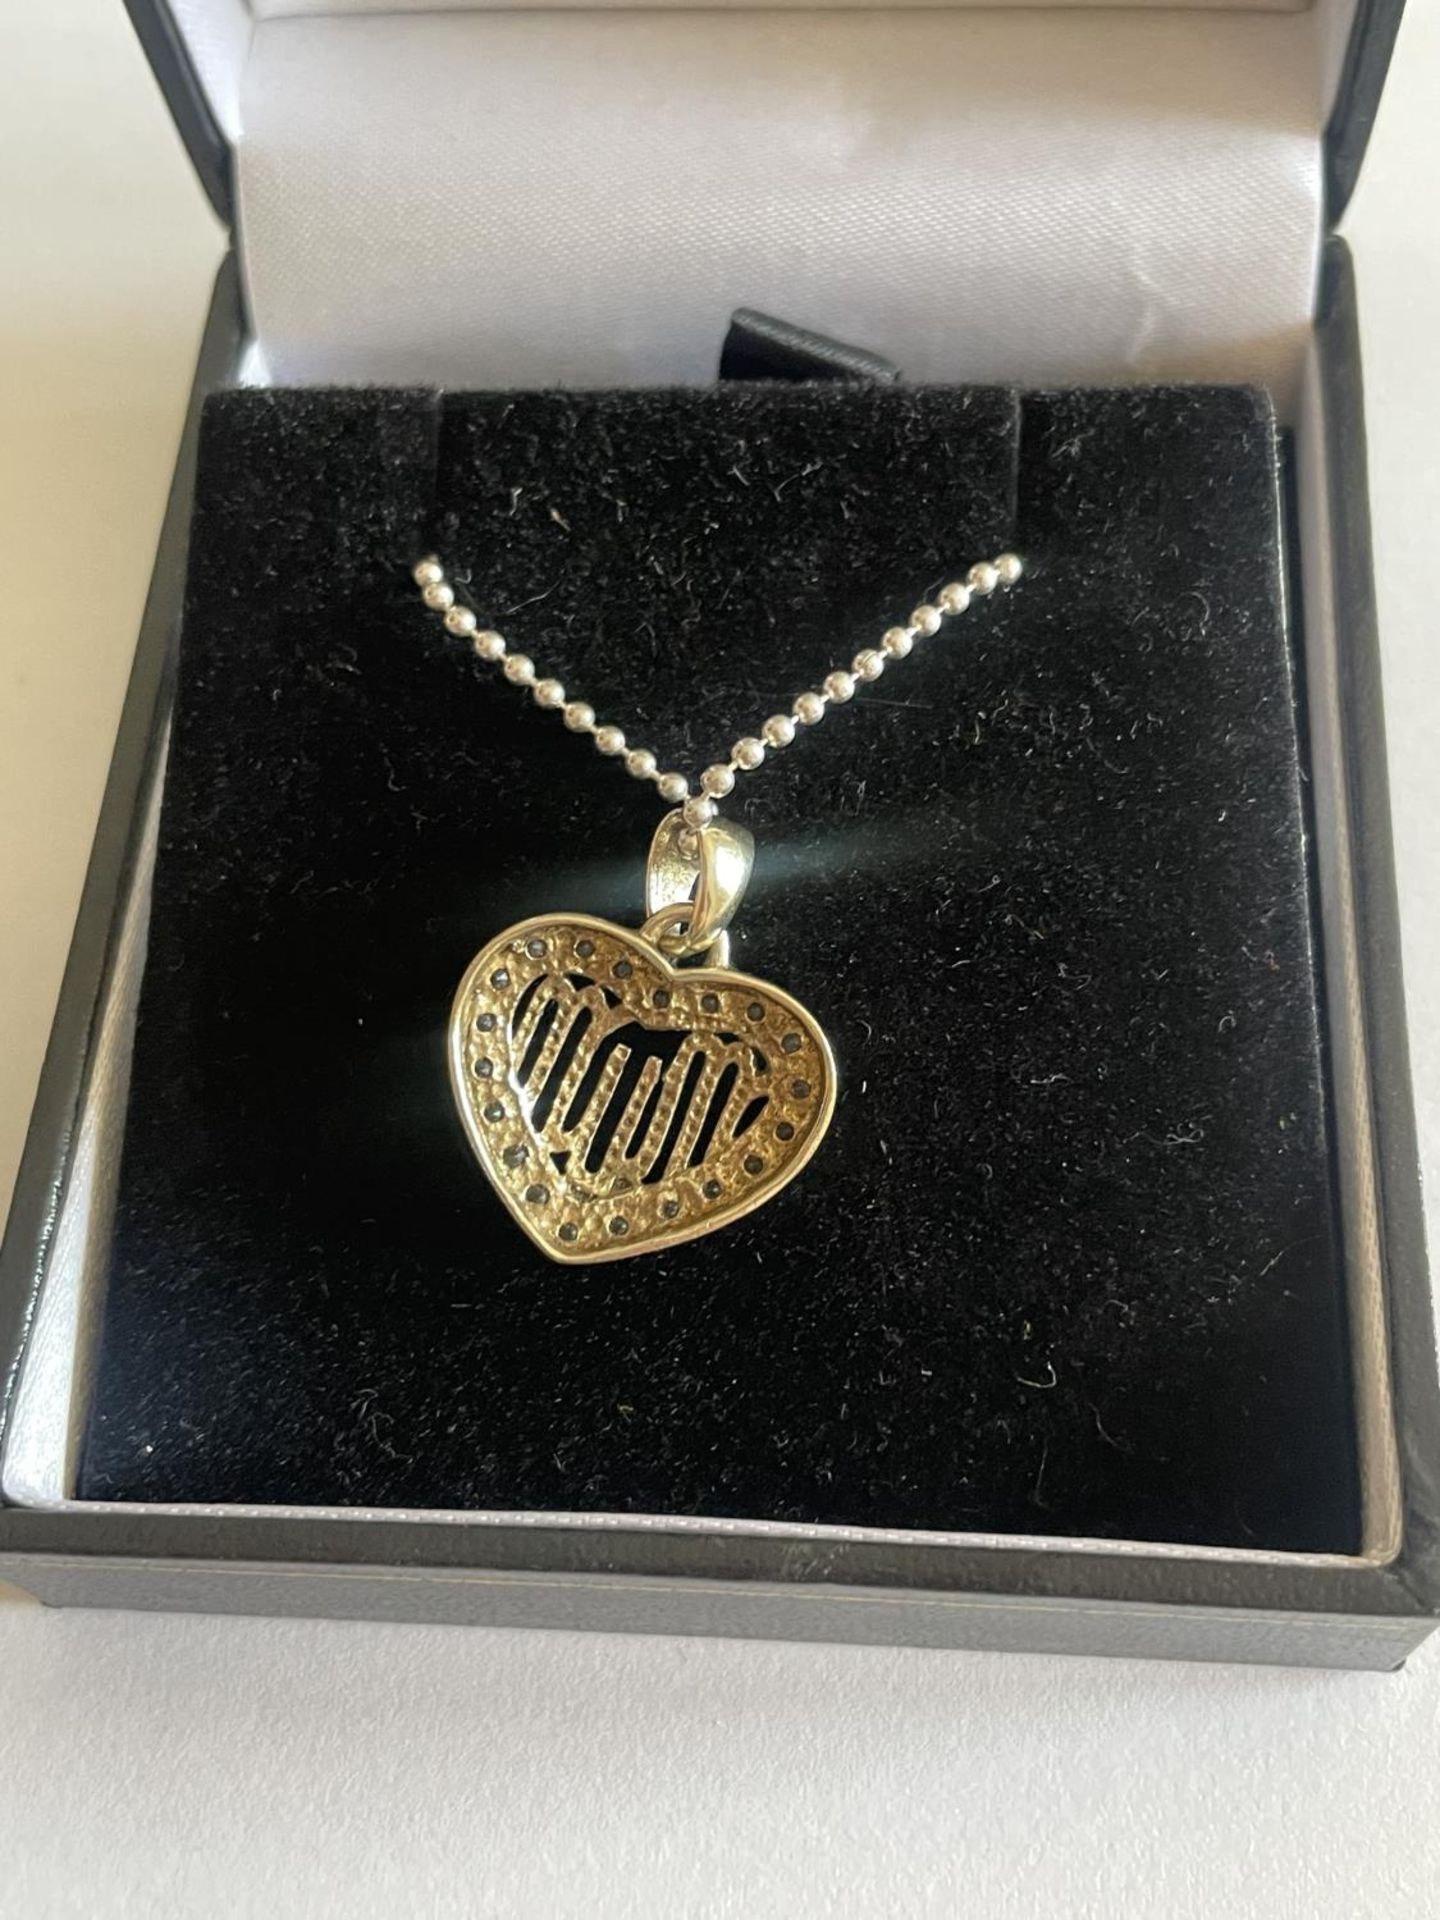 A SILVER NECKLACE WITH MUM PENDANT IN A PRESENTATION BOX - Image 3 of 3